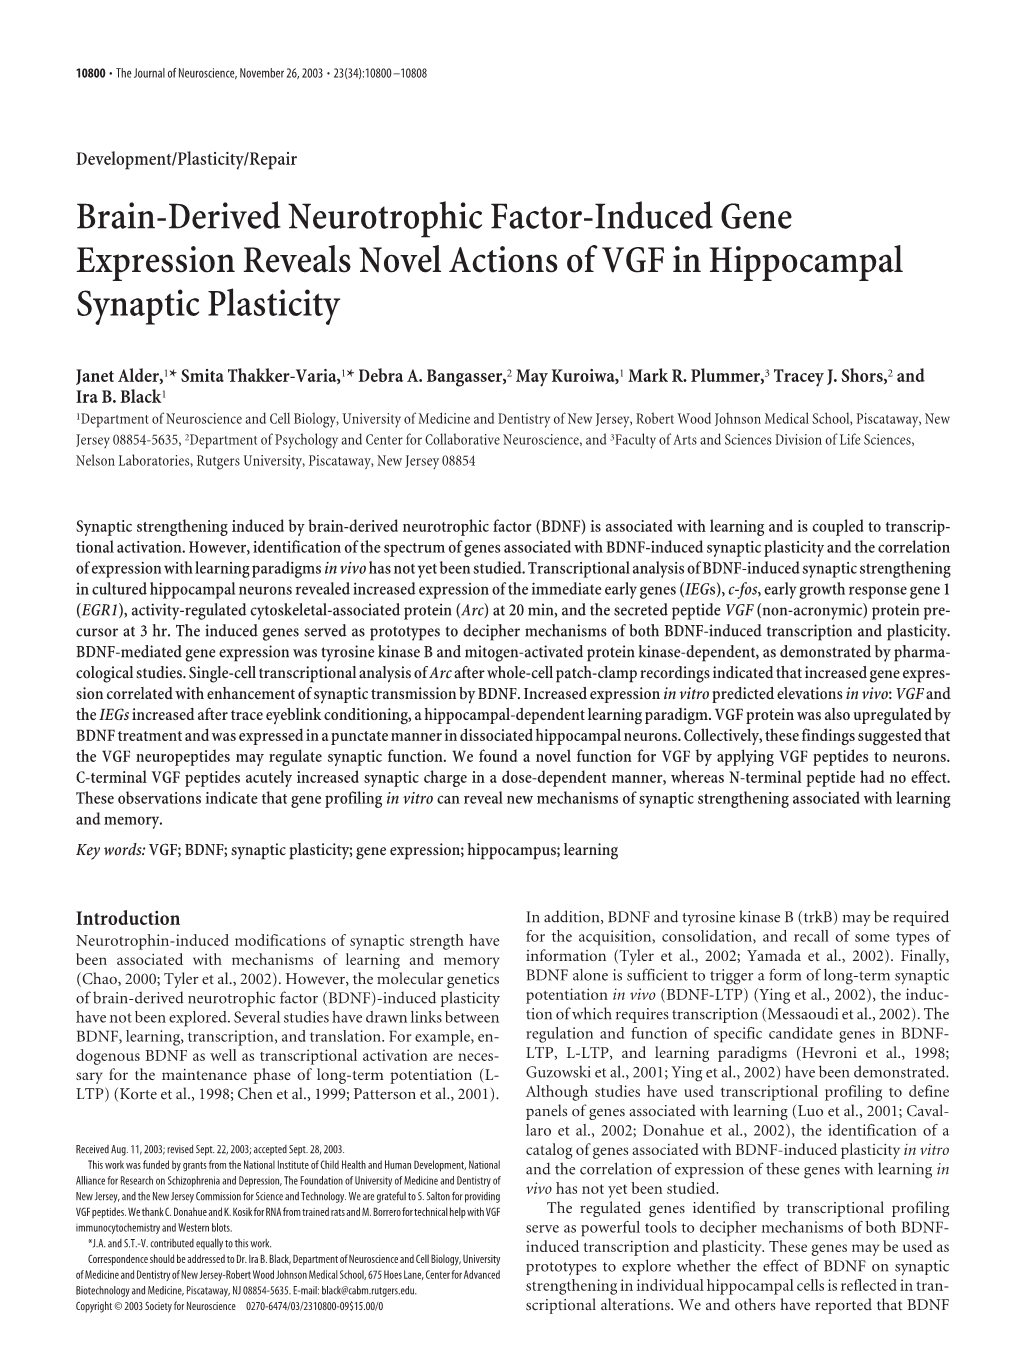 Brain-Derived Neurotrophic Factor-Induced Gene Expression Reveals Novel Actions of VGF in Hippocampal Synaptic Plasticity